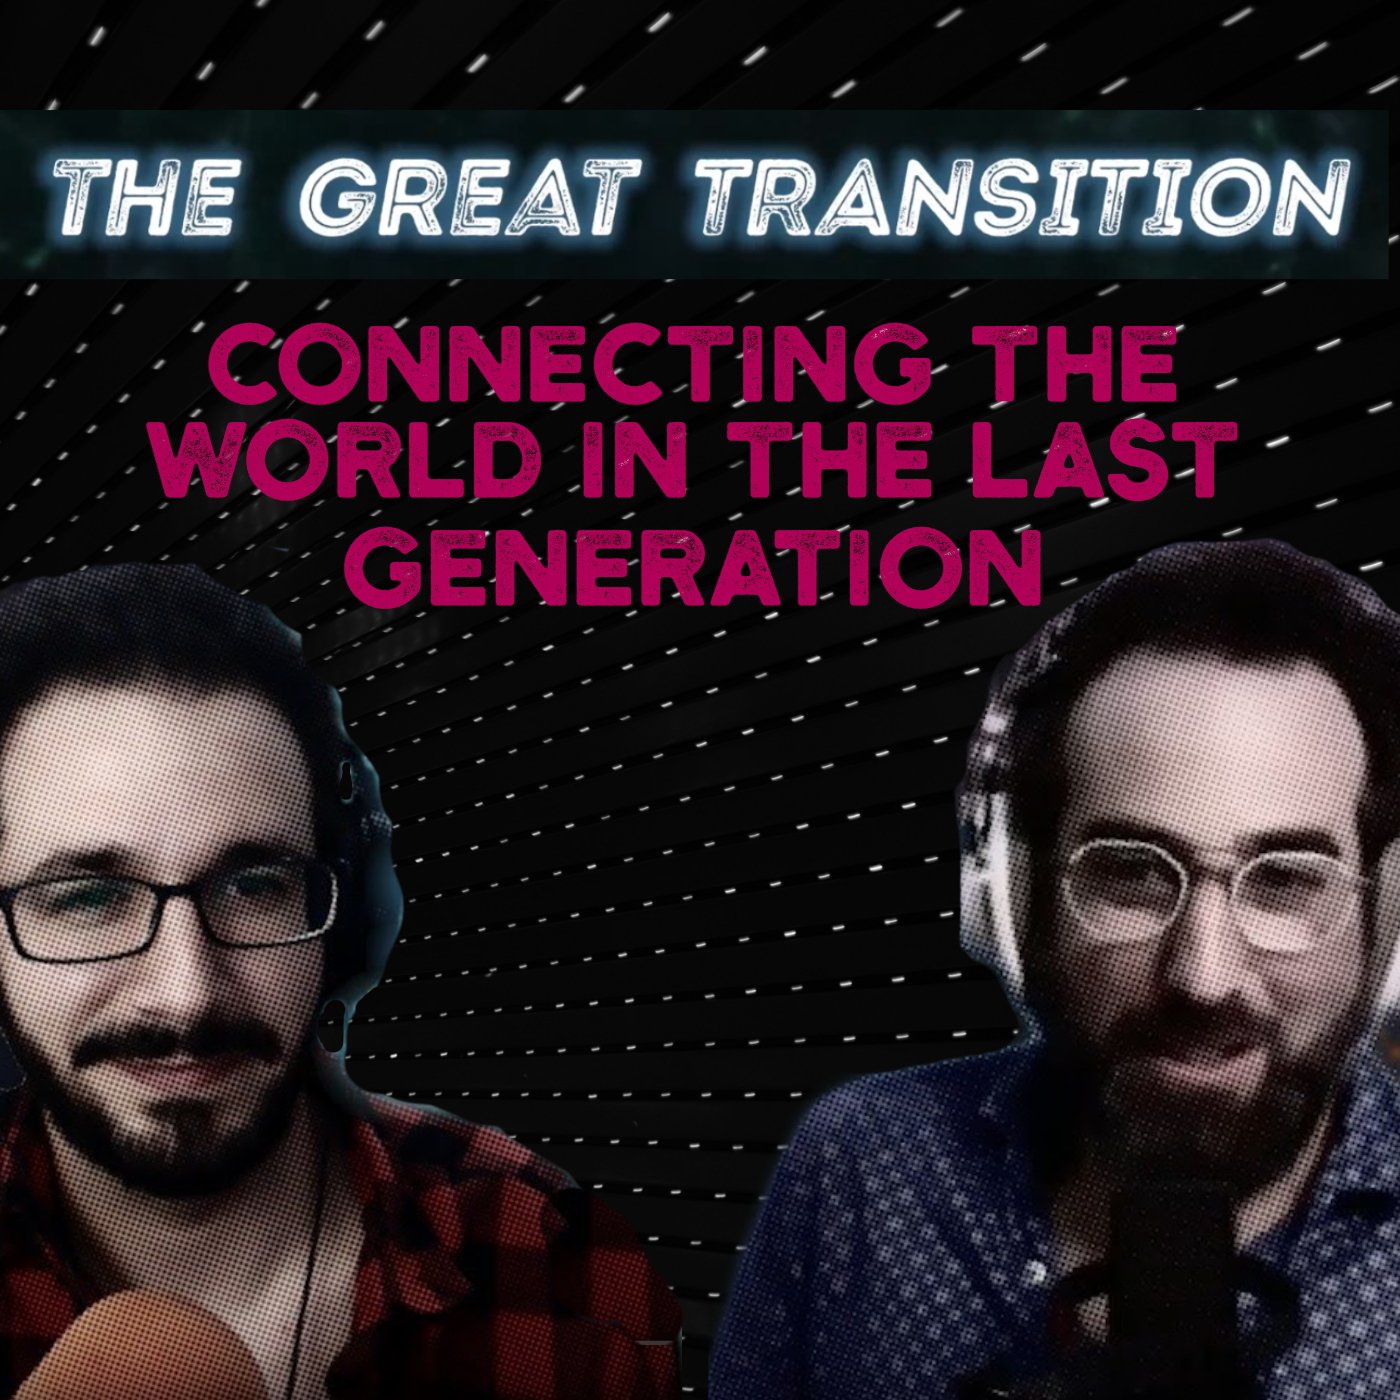 The Great Transition - Connecting the World in the Last Generation